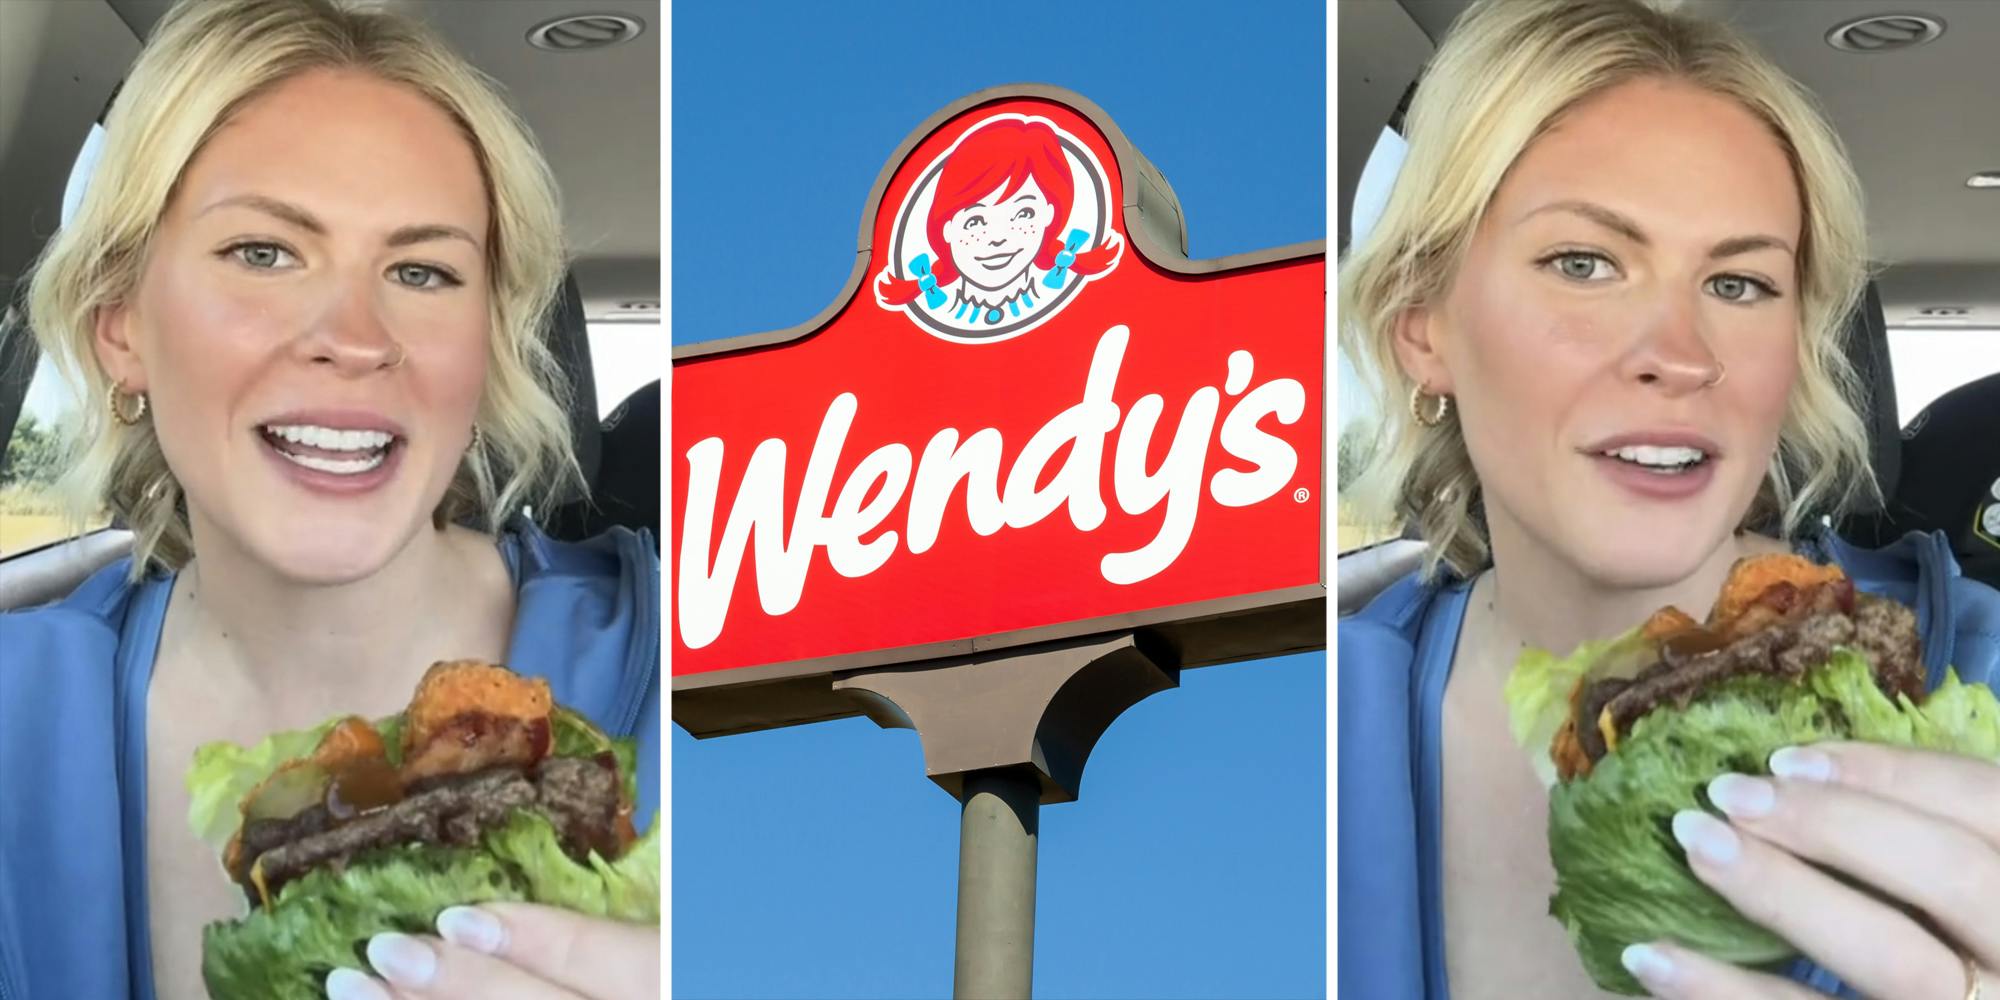 Woman talking with food in her hand(l+r), Wendy's sign(c)